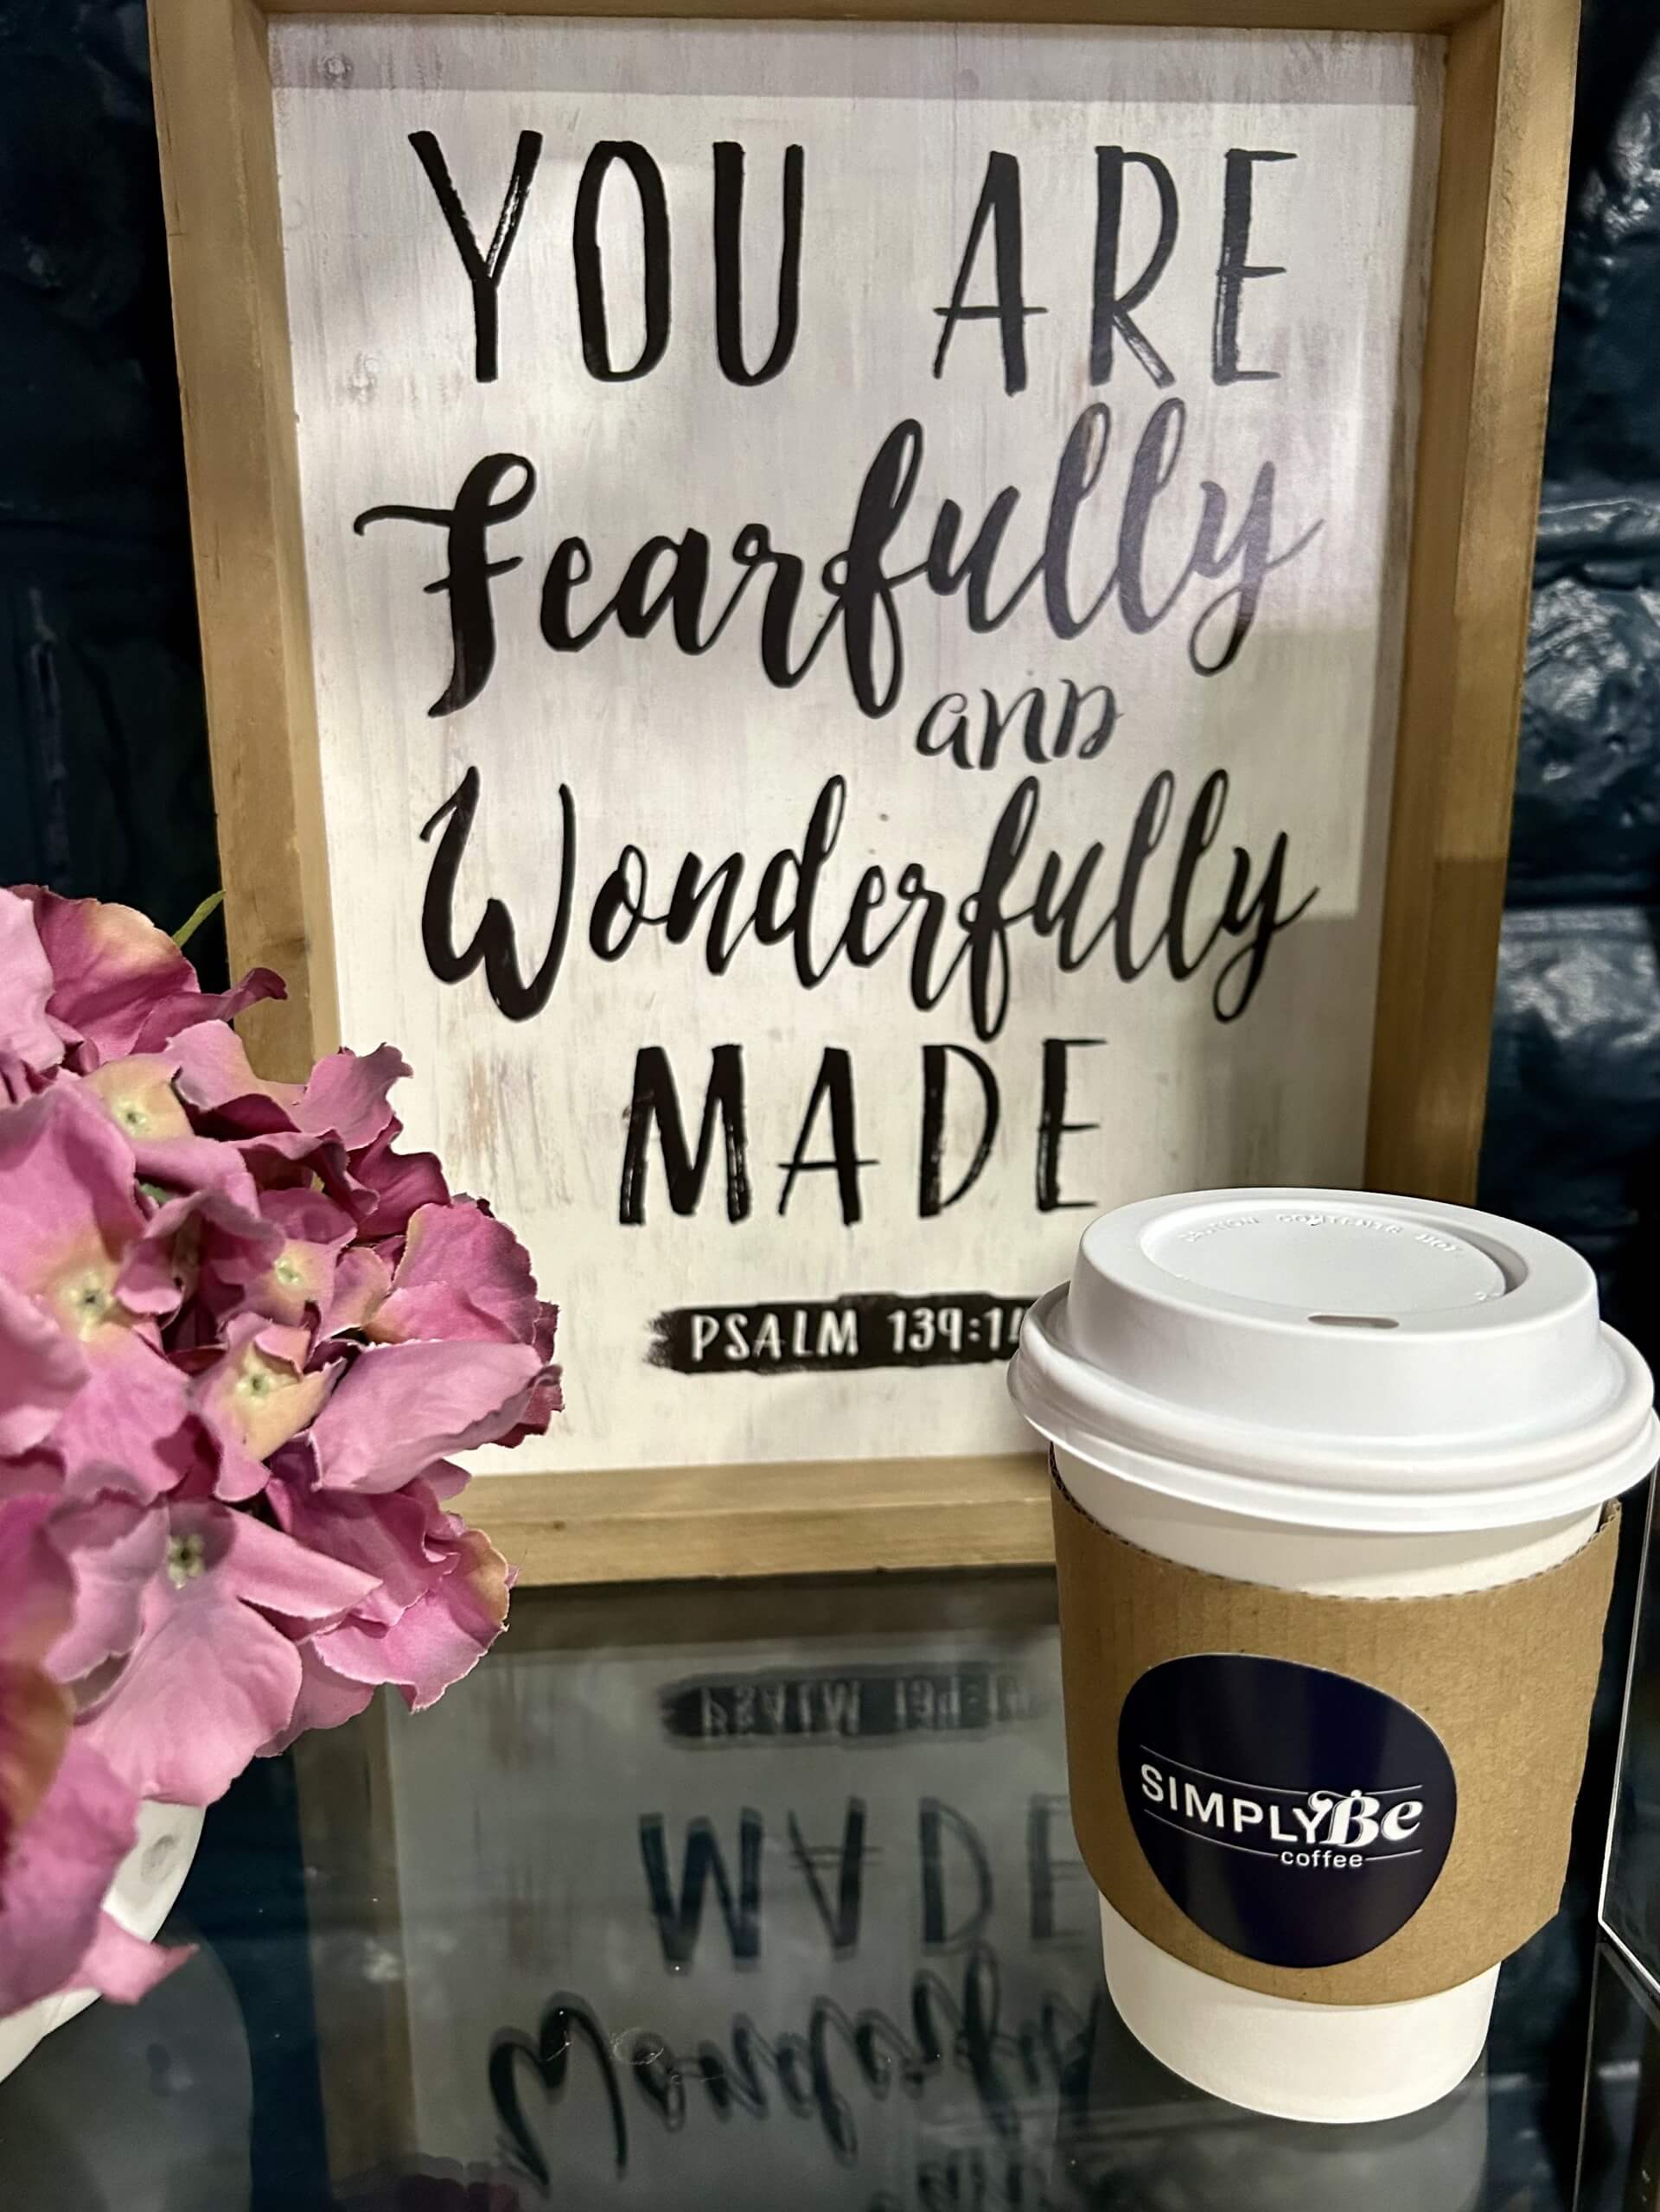 You Are Fearfully and Wonderfully Made, at SimplyBe Coffee in Leesburg